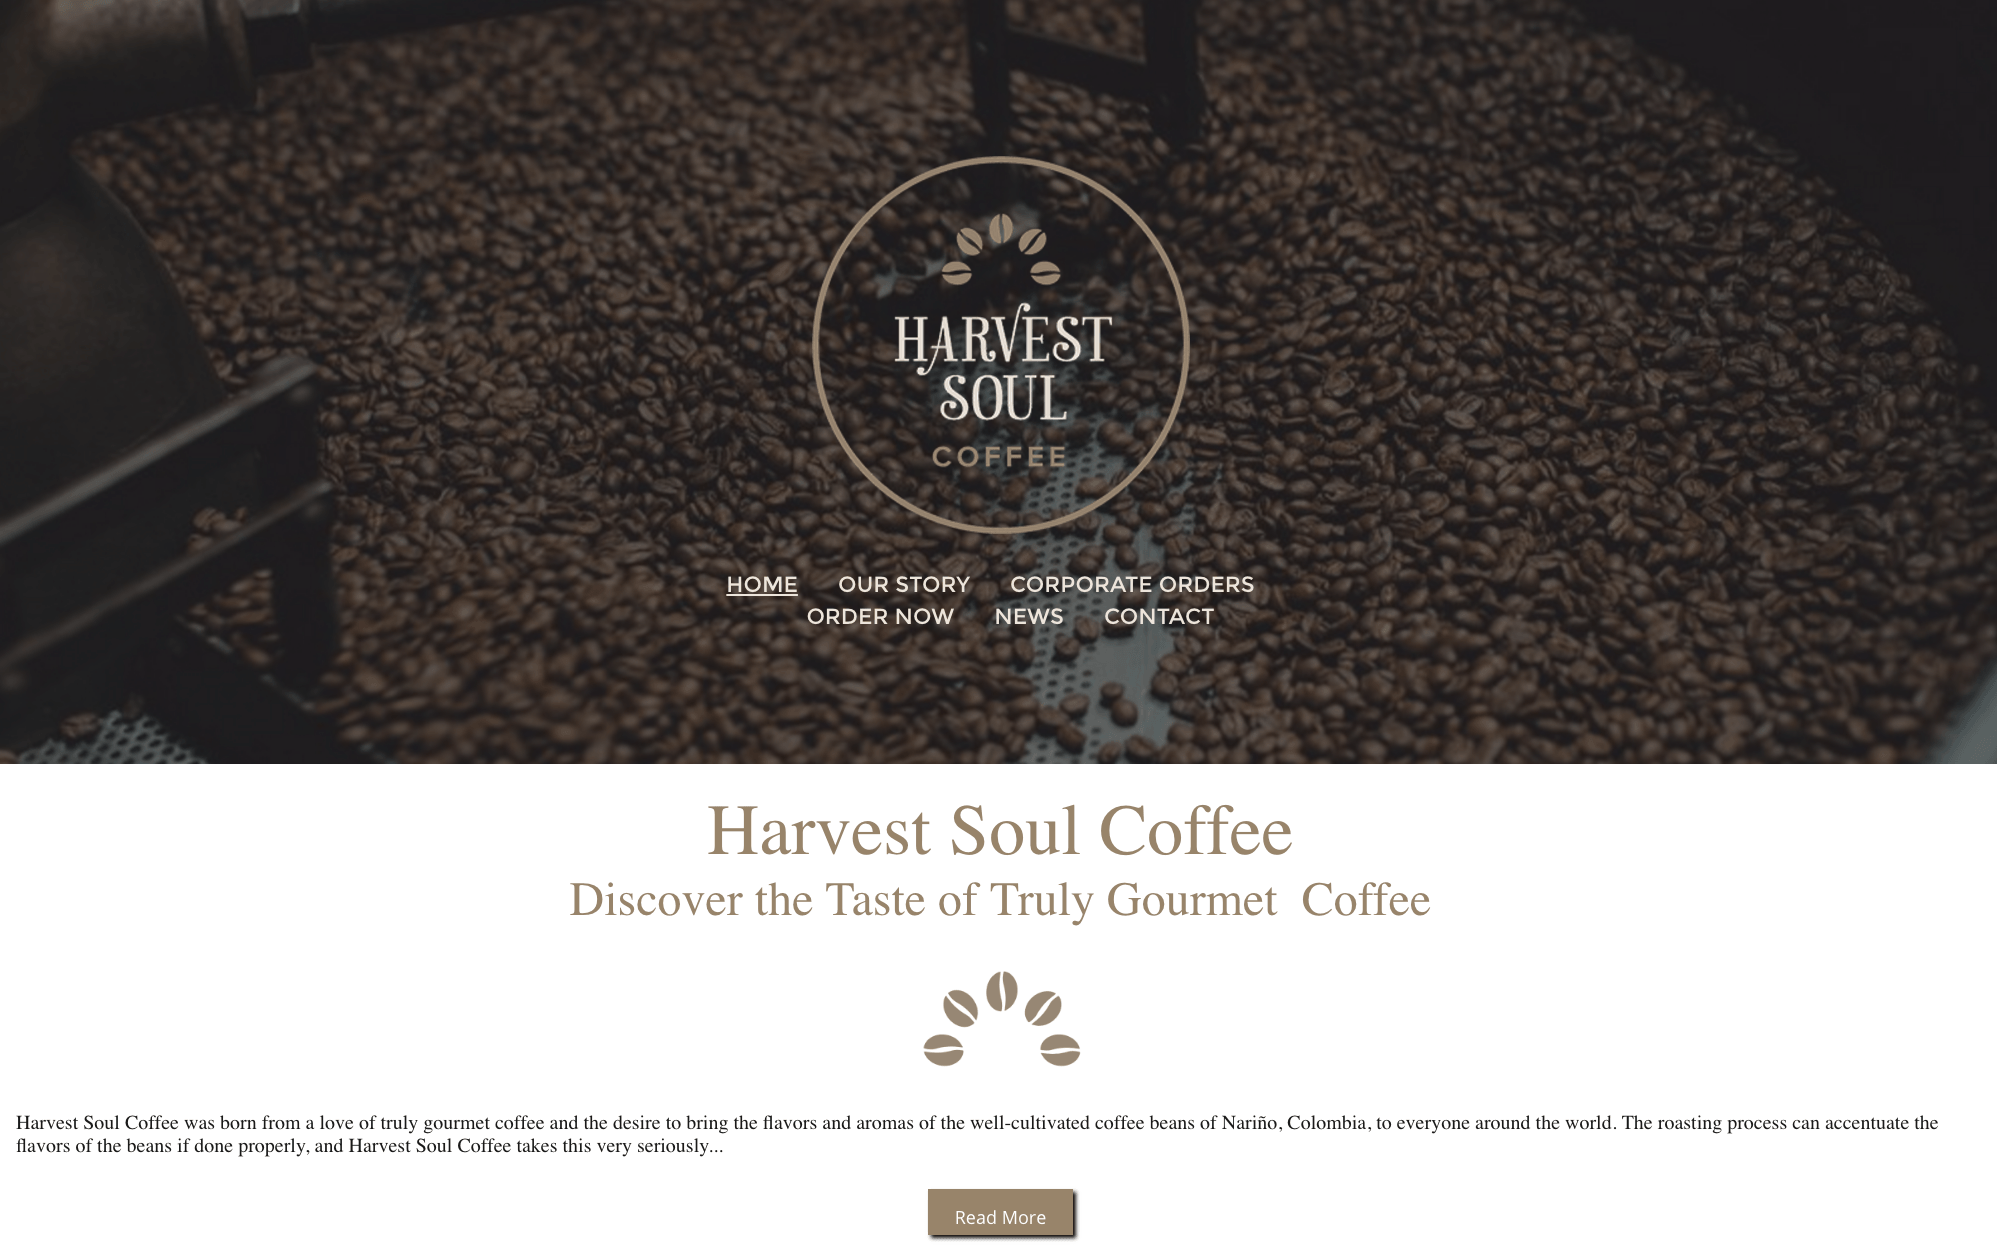 Web Designers at Osky Blue Create a New Site for Harvest Soul Coffee